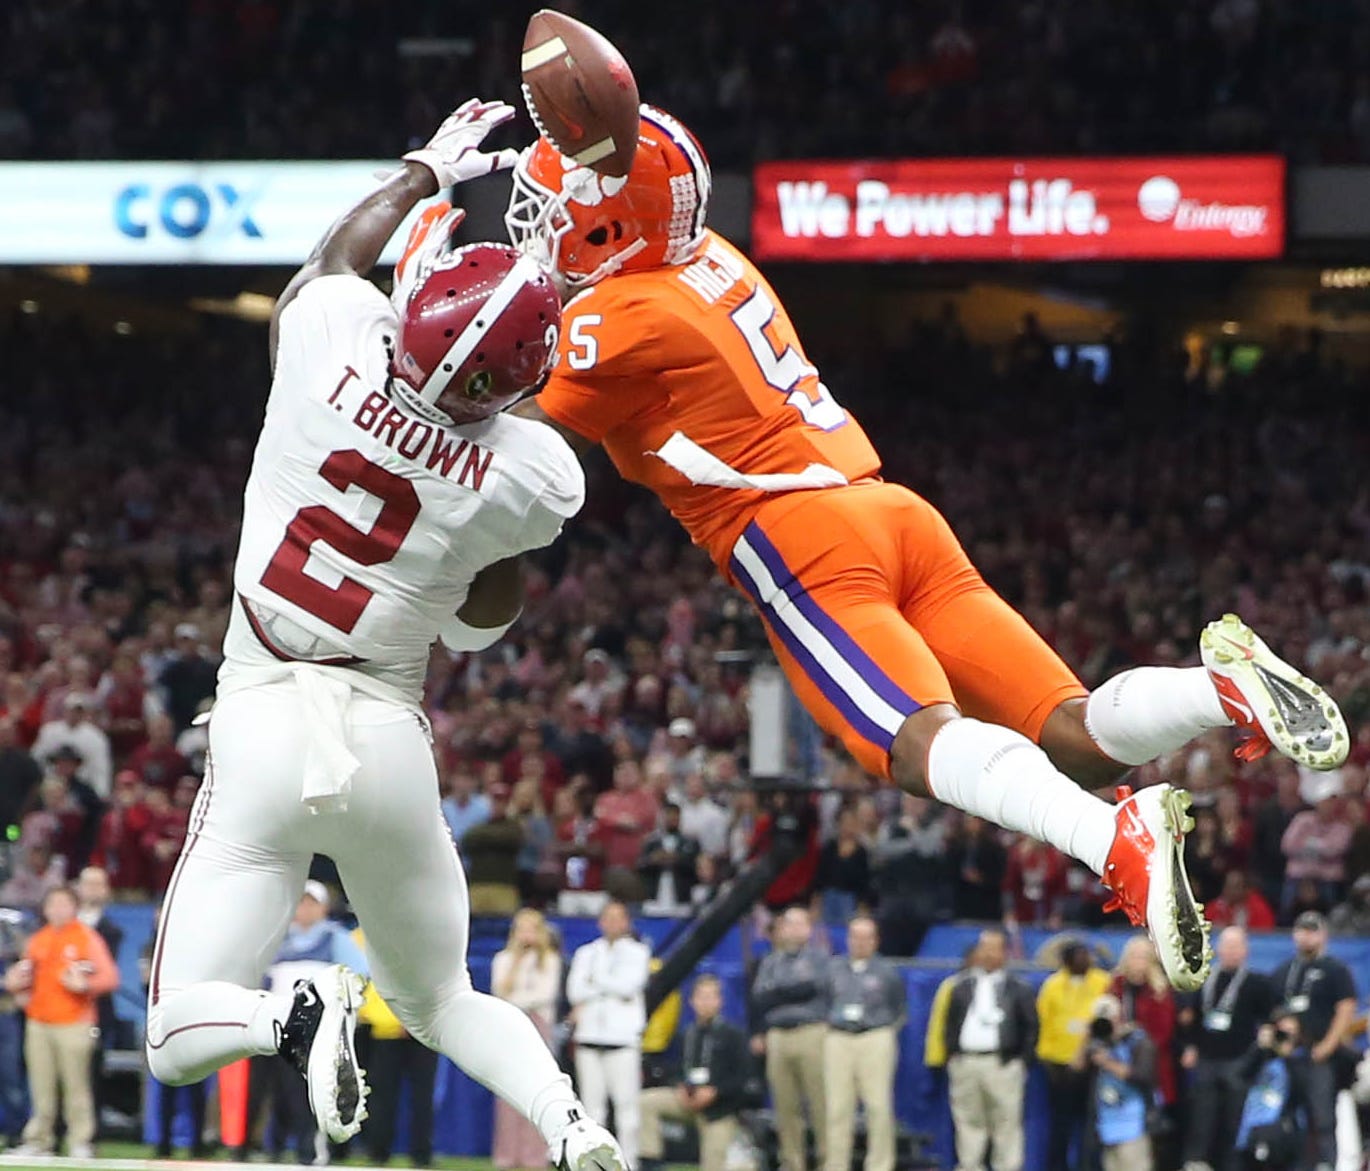 Alabama Crimson Tide defensive back Tony Brown (2) breaks up a pass intended for Clemson Tigers wide receiver Tee Higgins (5) during the second quarter.